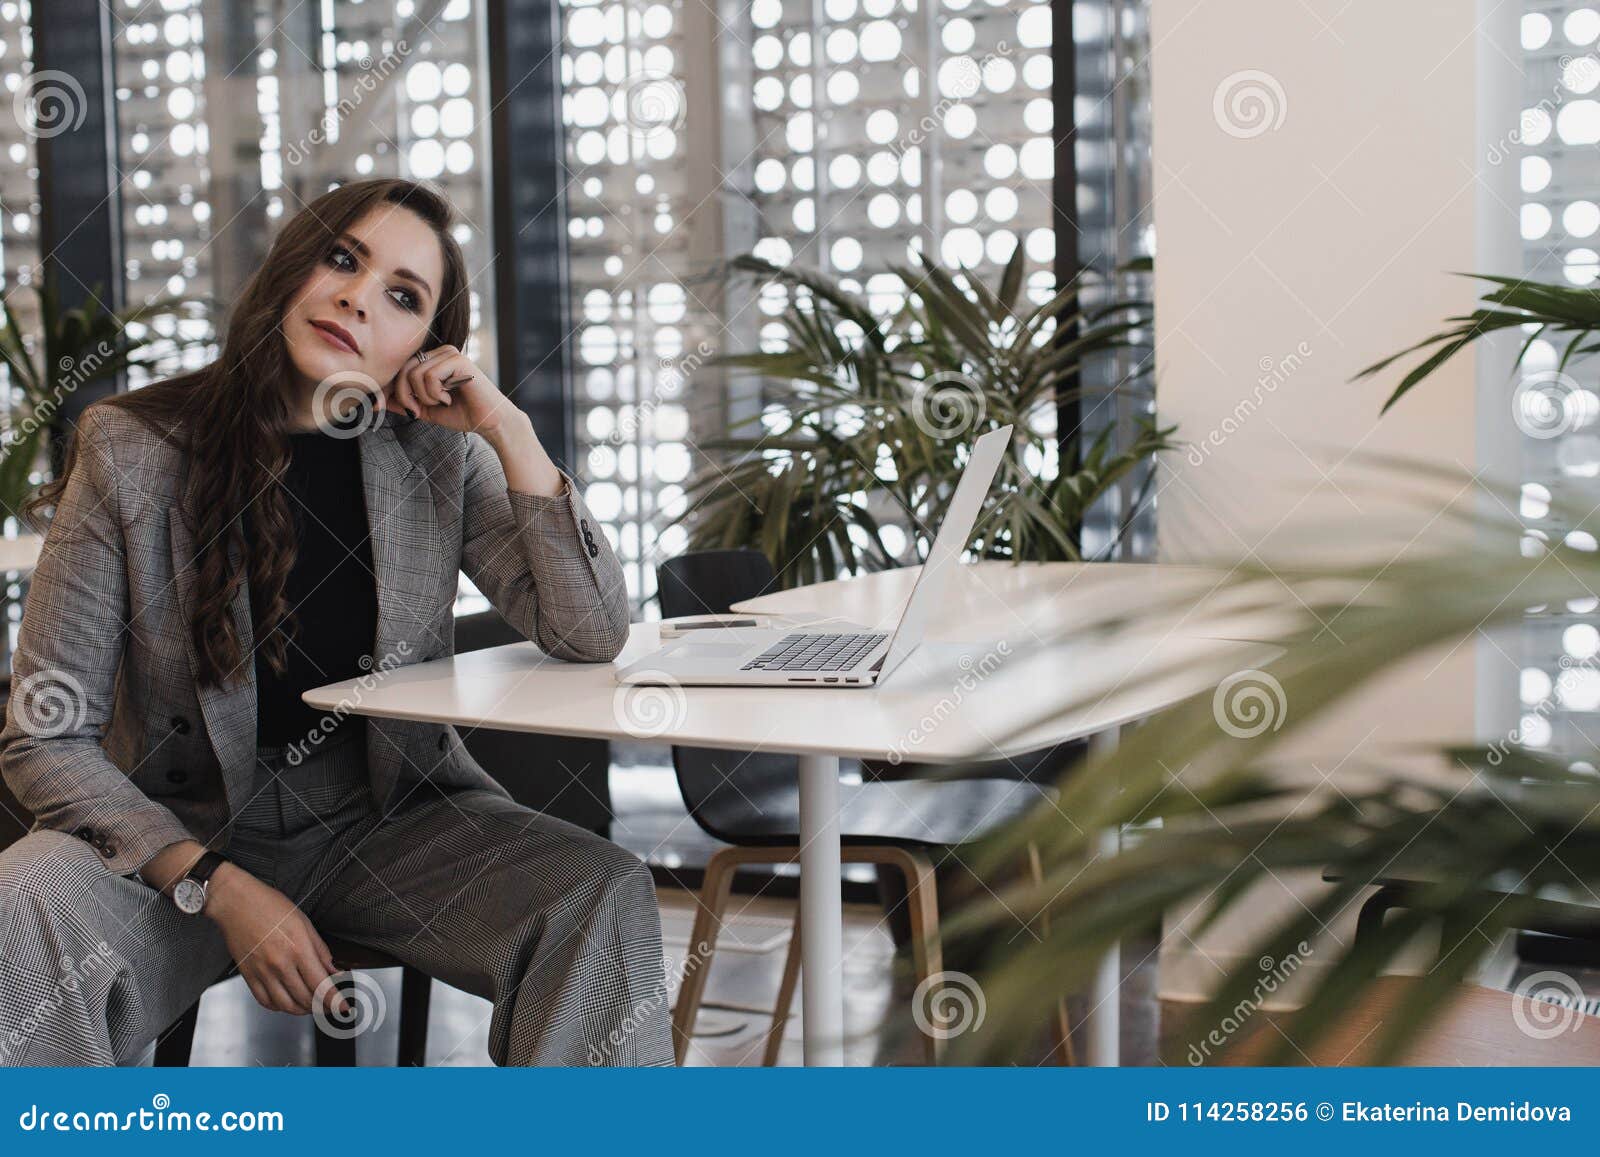 Serious Woman In A Public Place Looks At Camera Stock